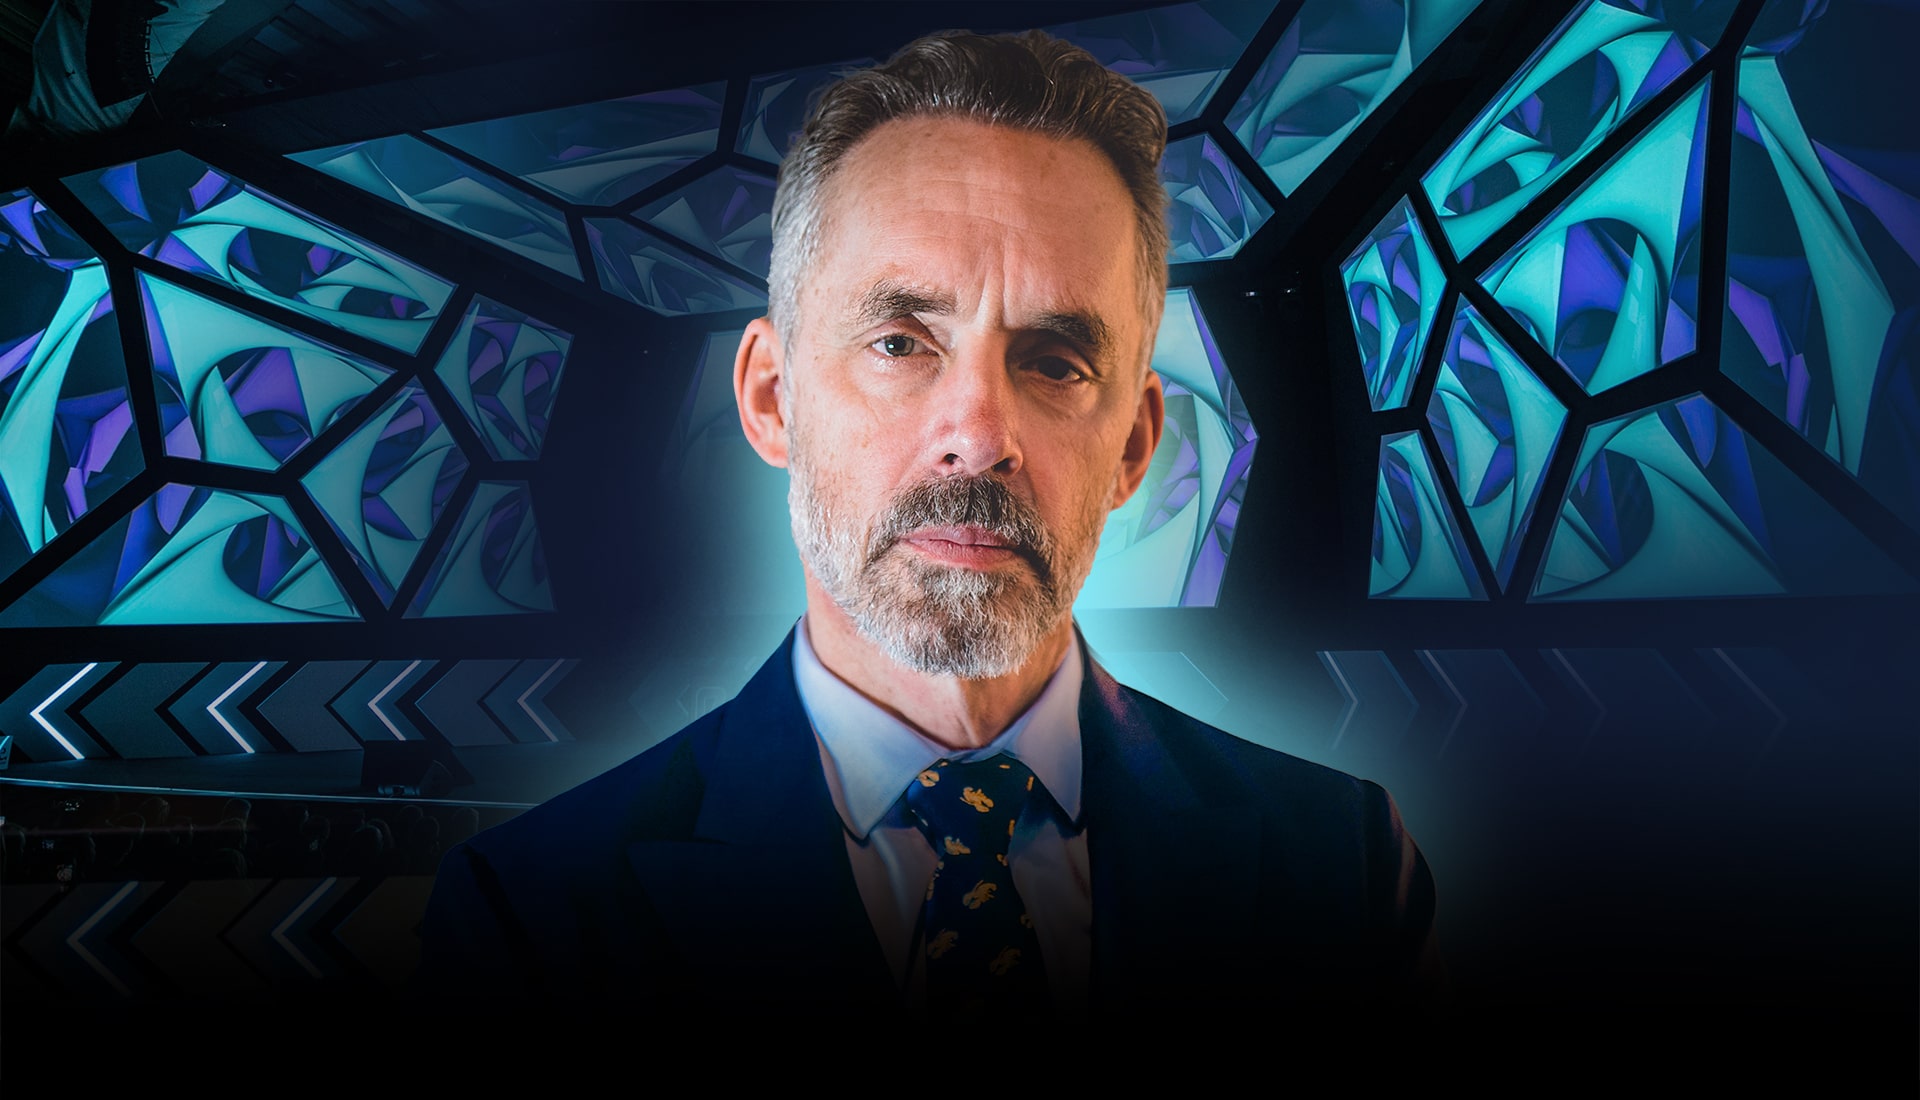 Jordan B Peterson is joining BRAND MINDS 2022